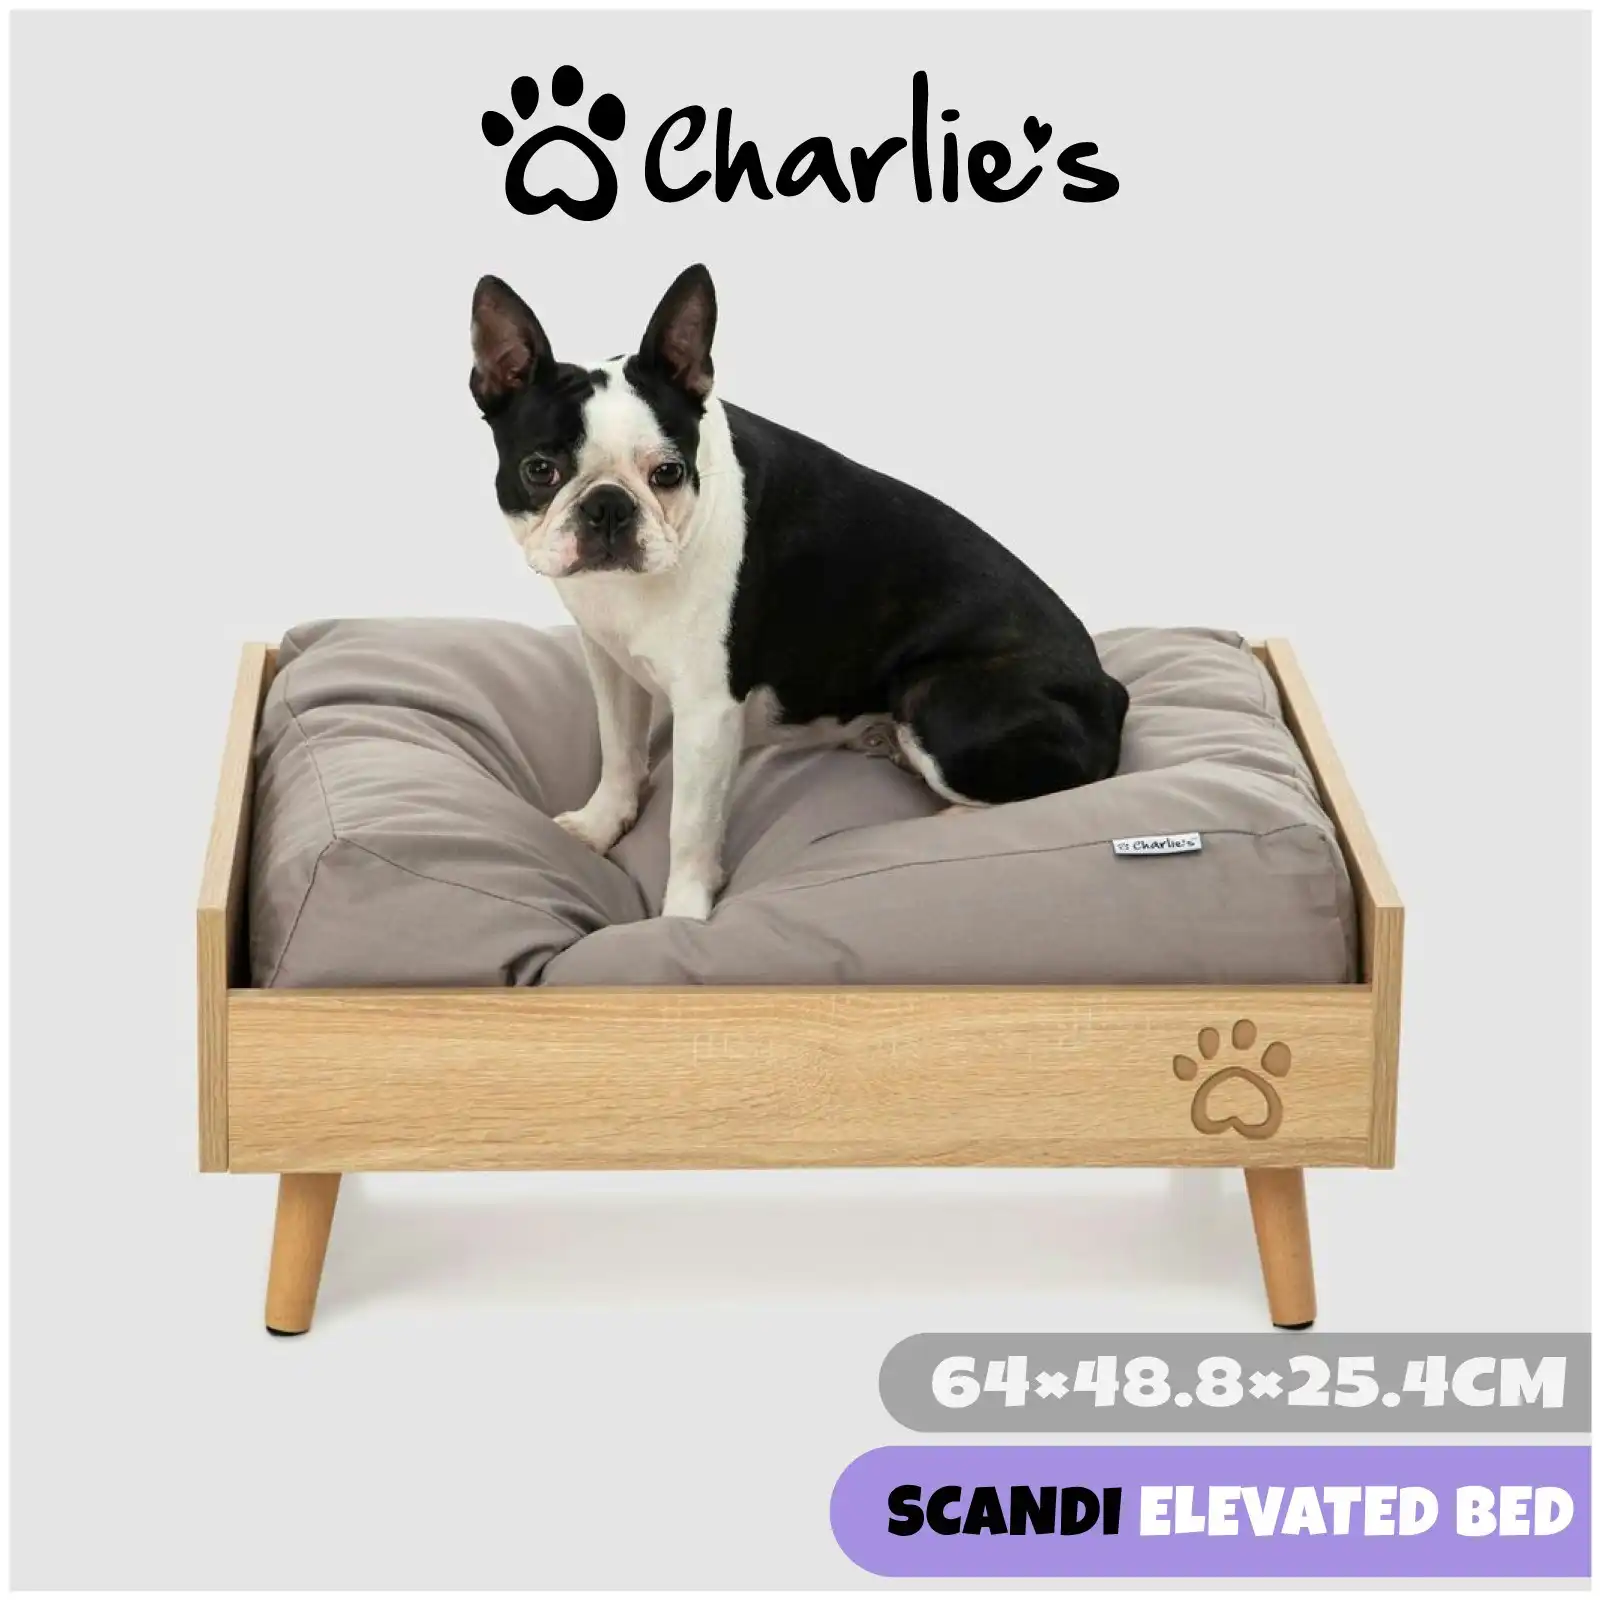 Charlie's Scandi Elevated Bed with Natural Frame & Grey Mattress